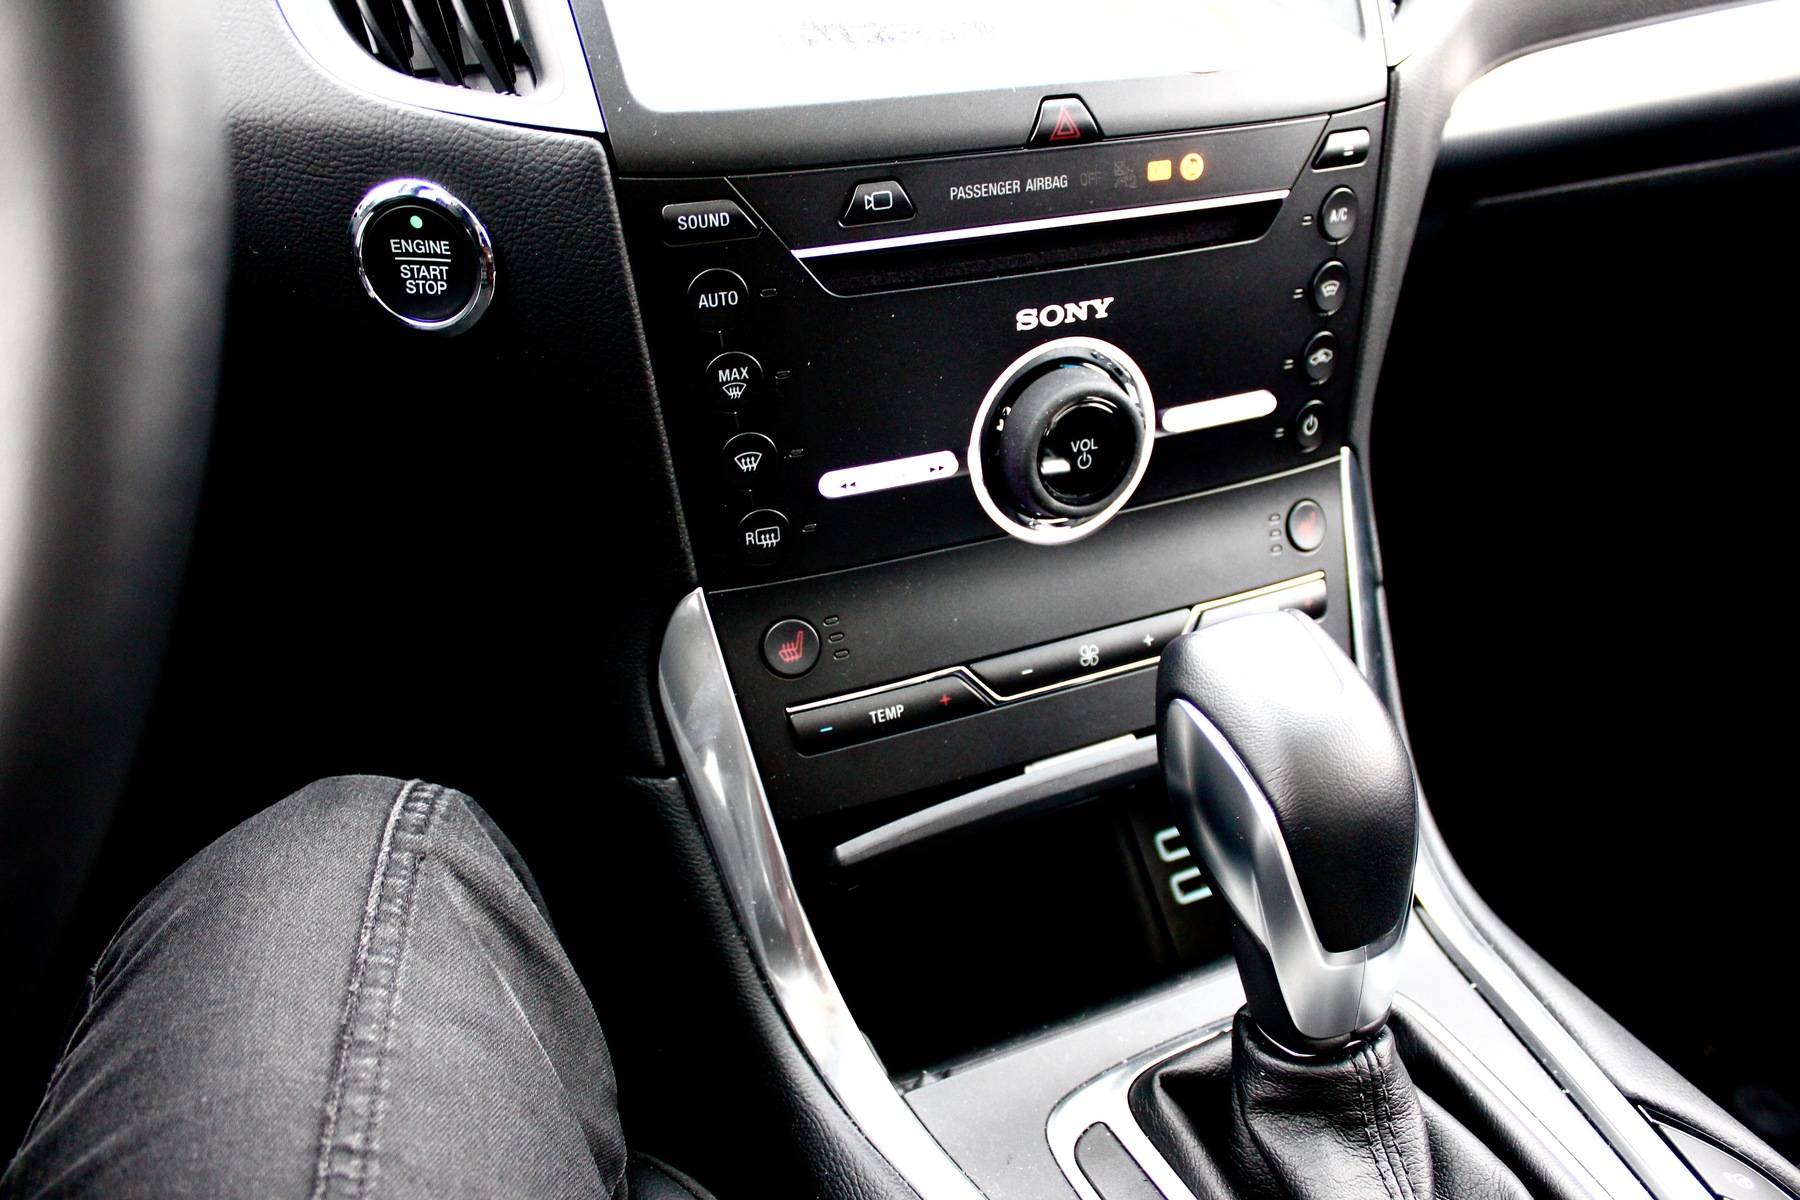 Ford Edge review of the gear shift and ignition